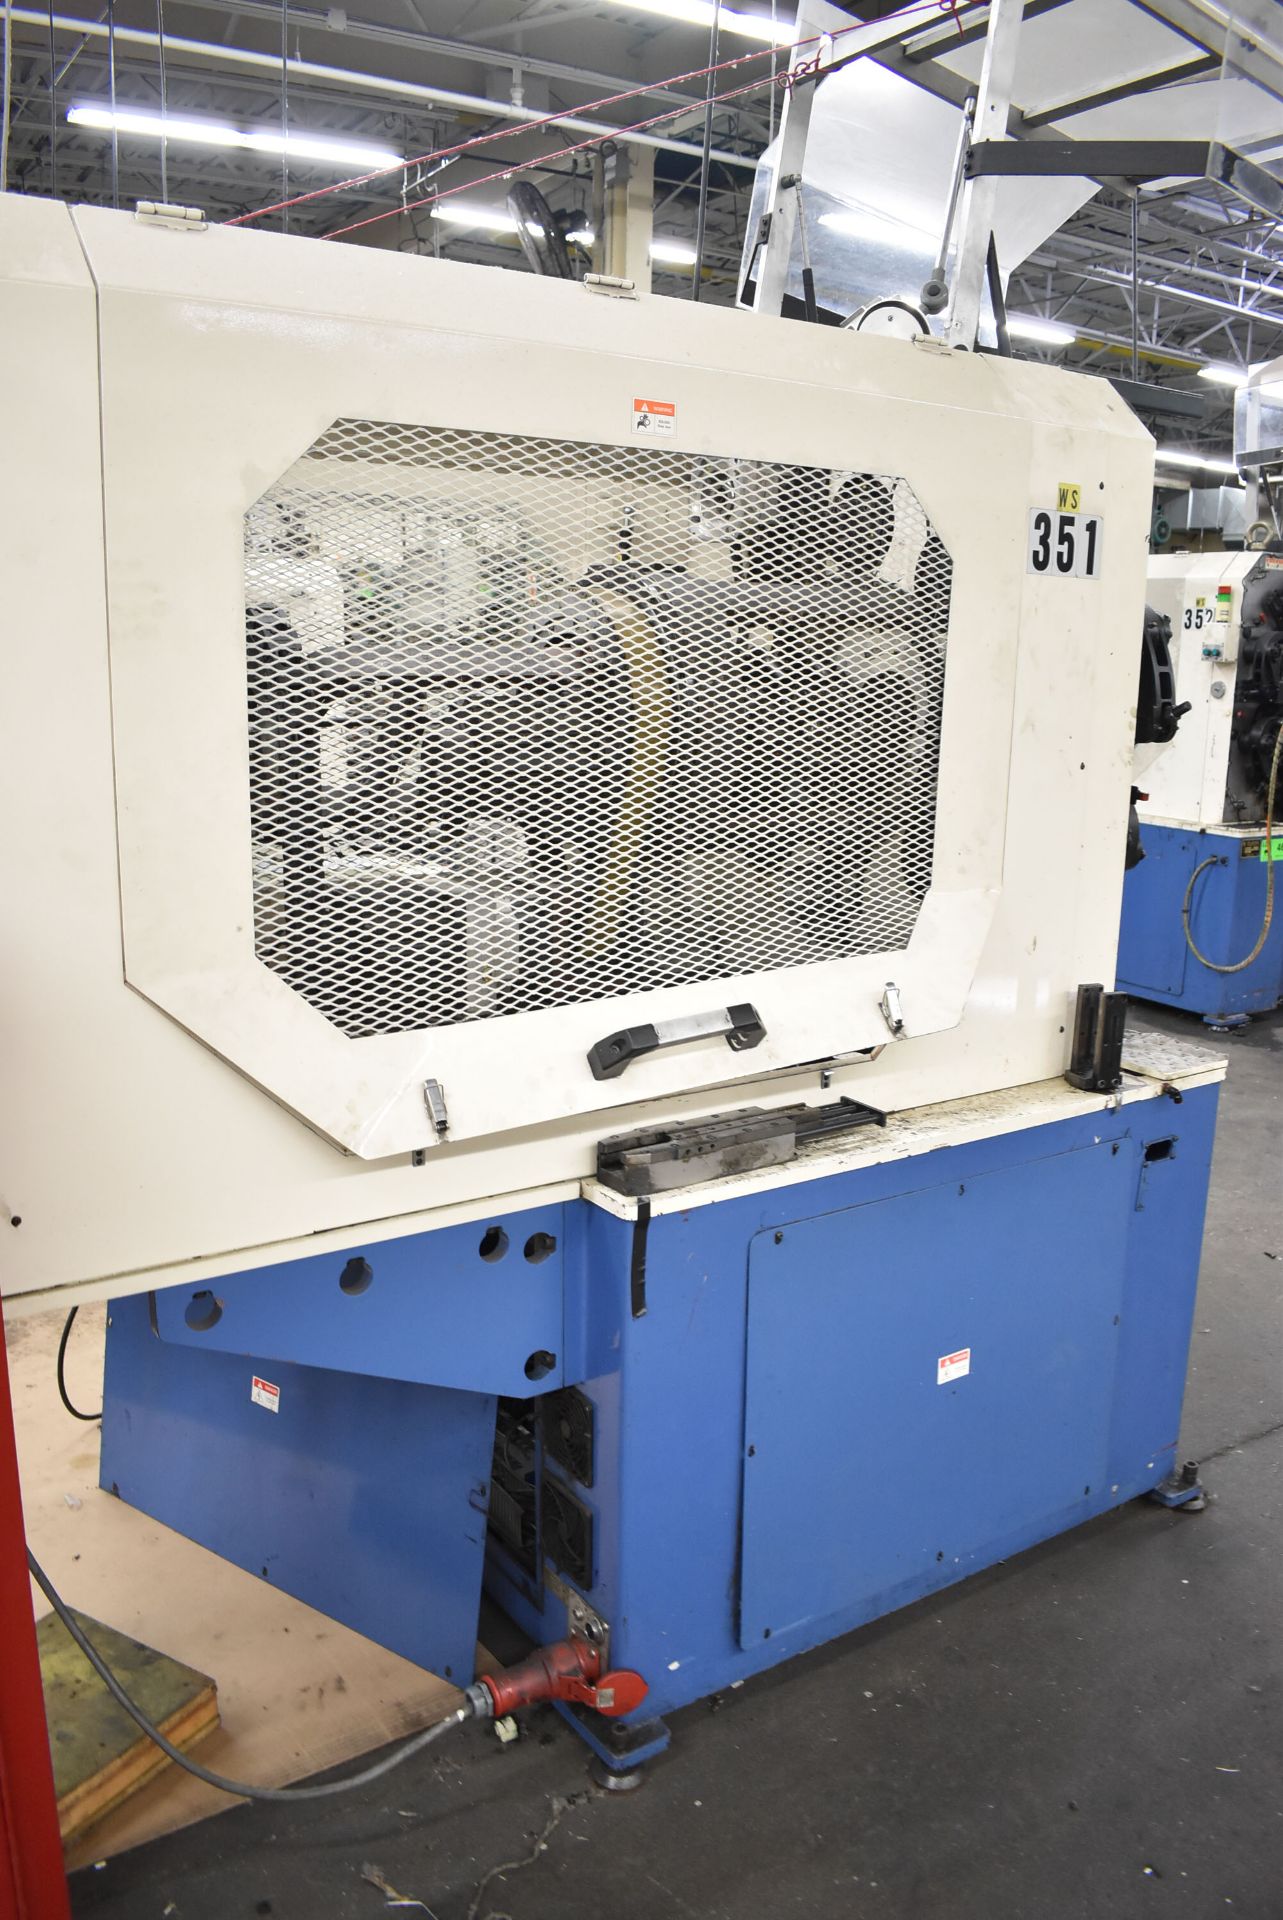 NUCOIL INDUSTRIES (2003) FX-35 7-AXIS HIGH SPEED CNC SPRING FORMER WITH NUCOIL INDUSTRIES CNC - Image 6 of 8